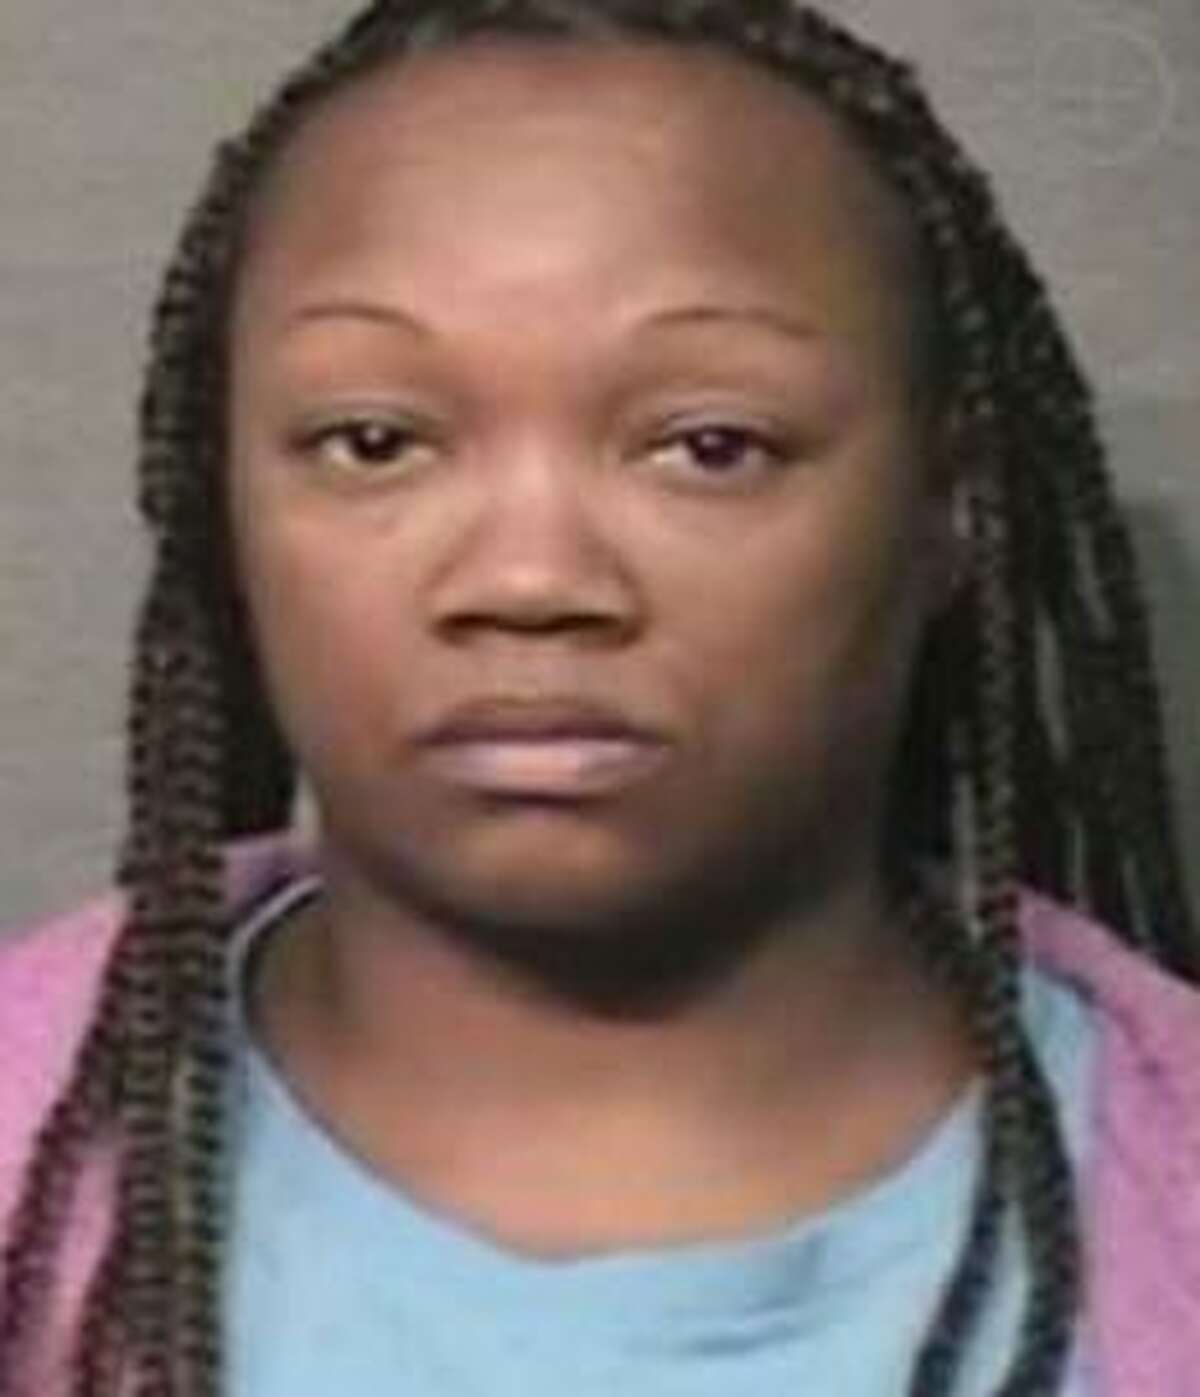 Crenshanda Williams, 43, who no longer works as a Houston 911 operator, has been charged with misdemeanor of interference with an emergency telephone calls. Williams hung up on callers needing urgent assistance because "she did not want to talk to anyone at that time.?”